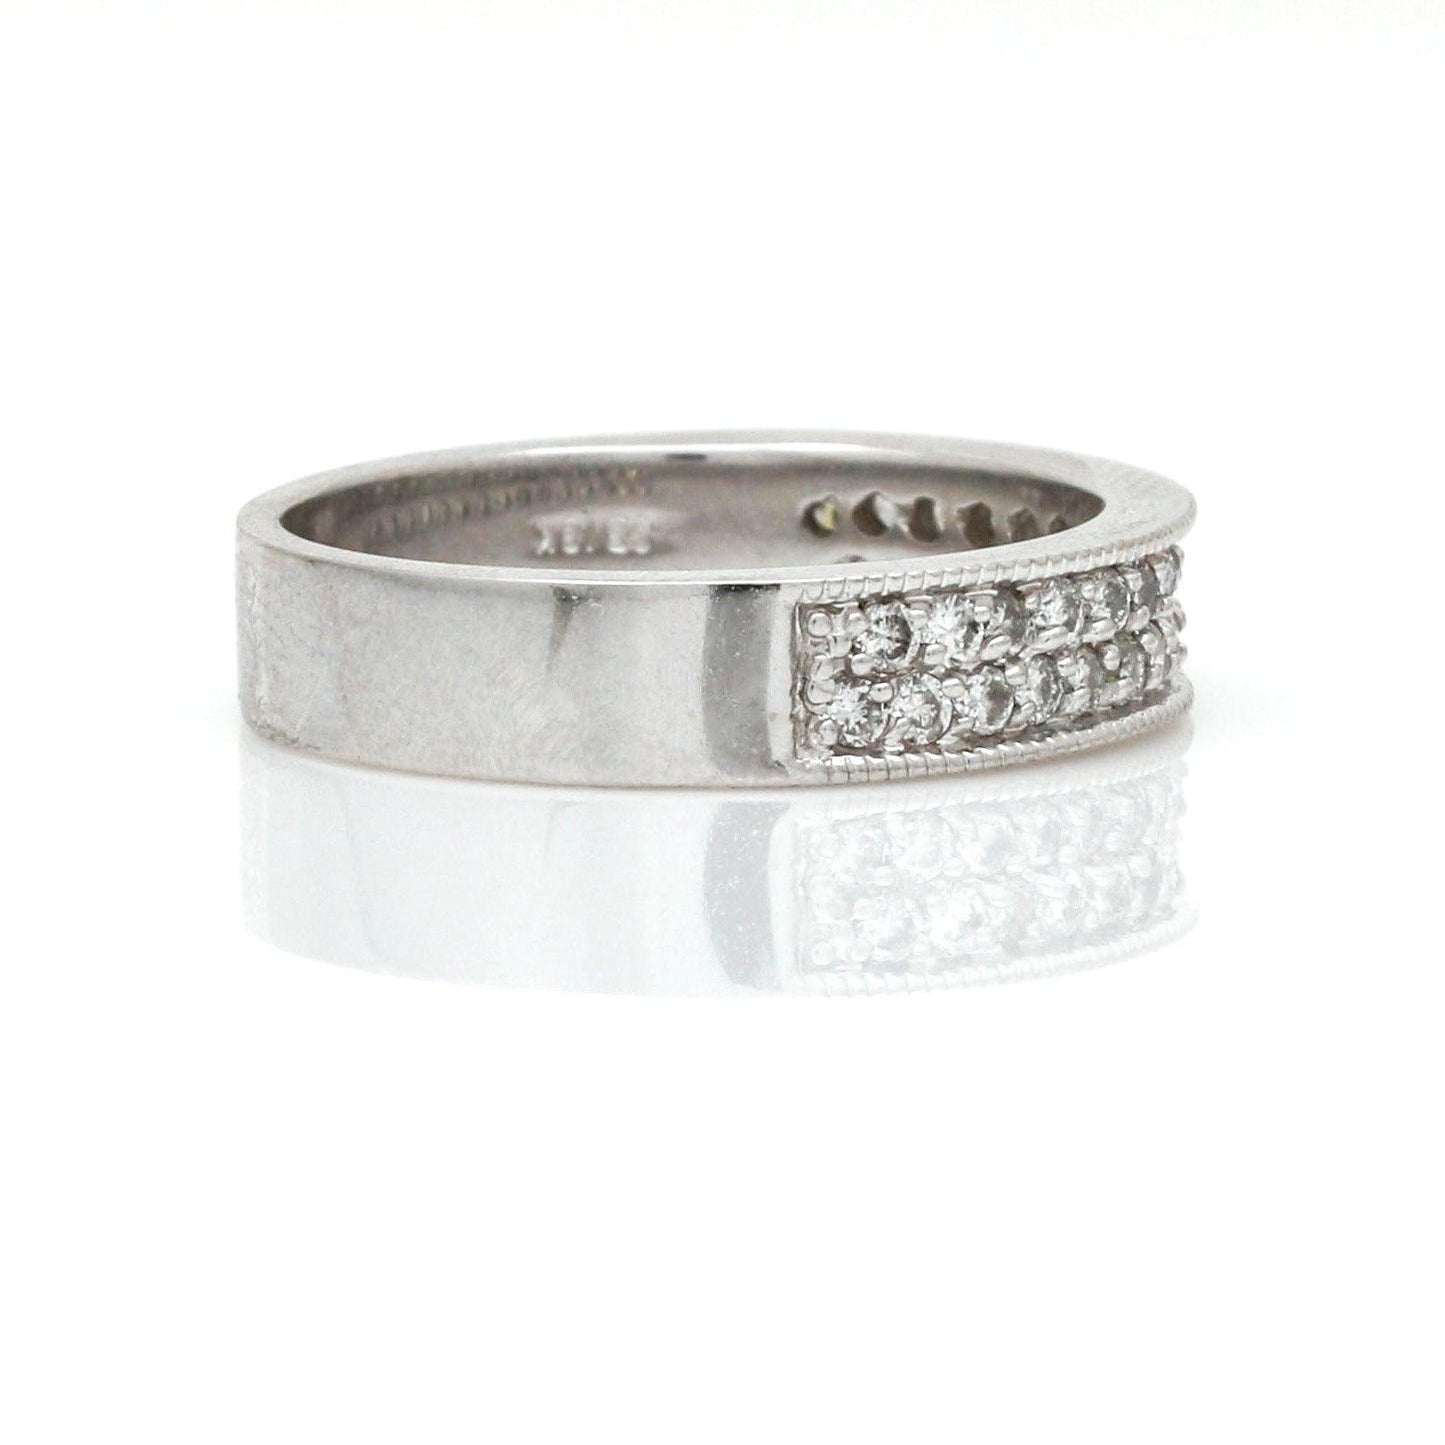 Women's Pave Diamond Ring in 18k White Gold Half-Eternity Band - 31 Jewels Inc.